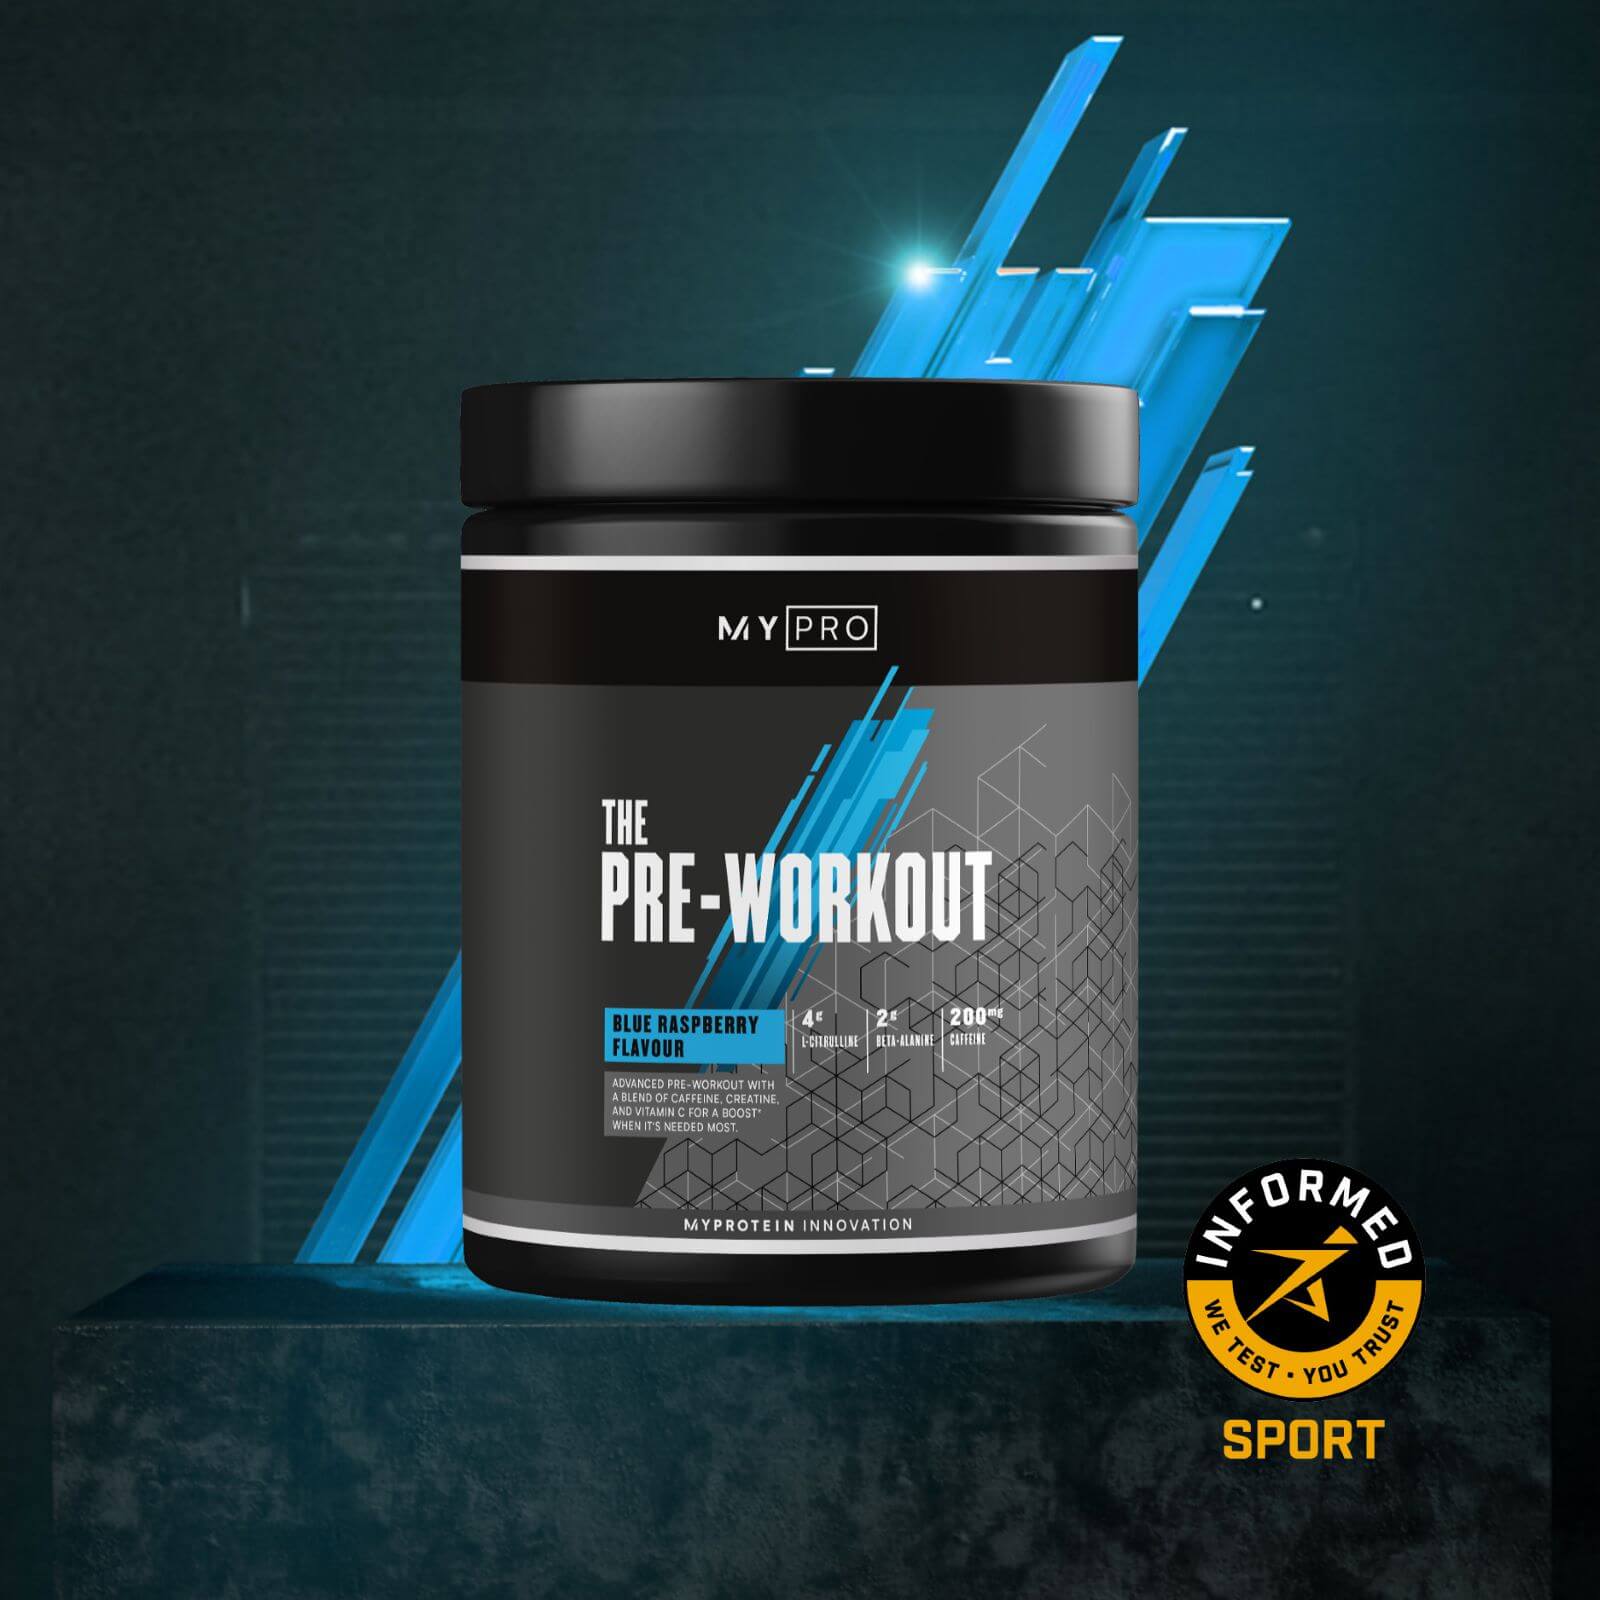 THE Pre-Workout - 30servings - Framboesa azul